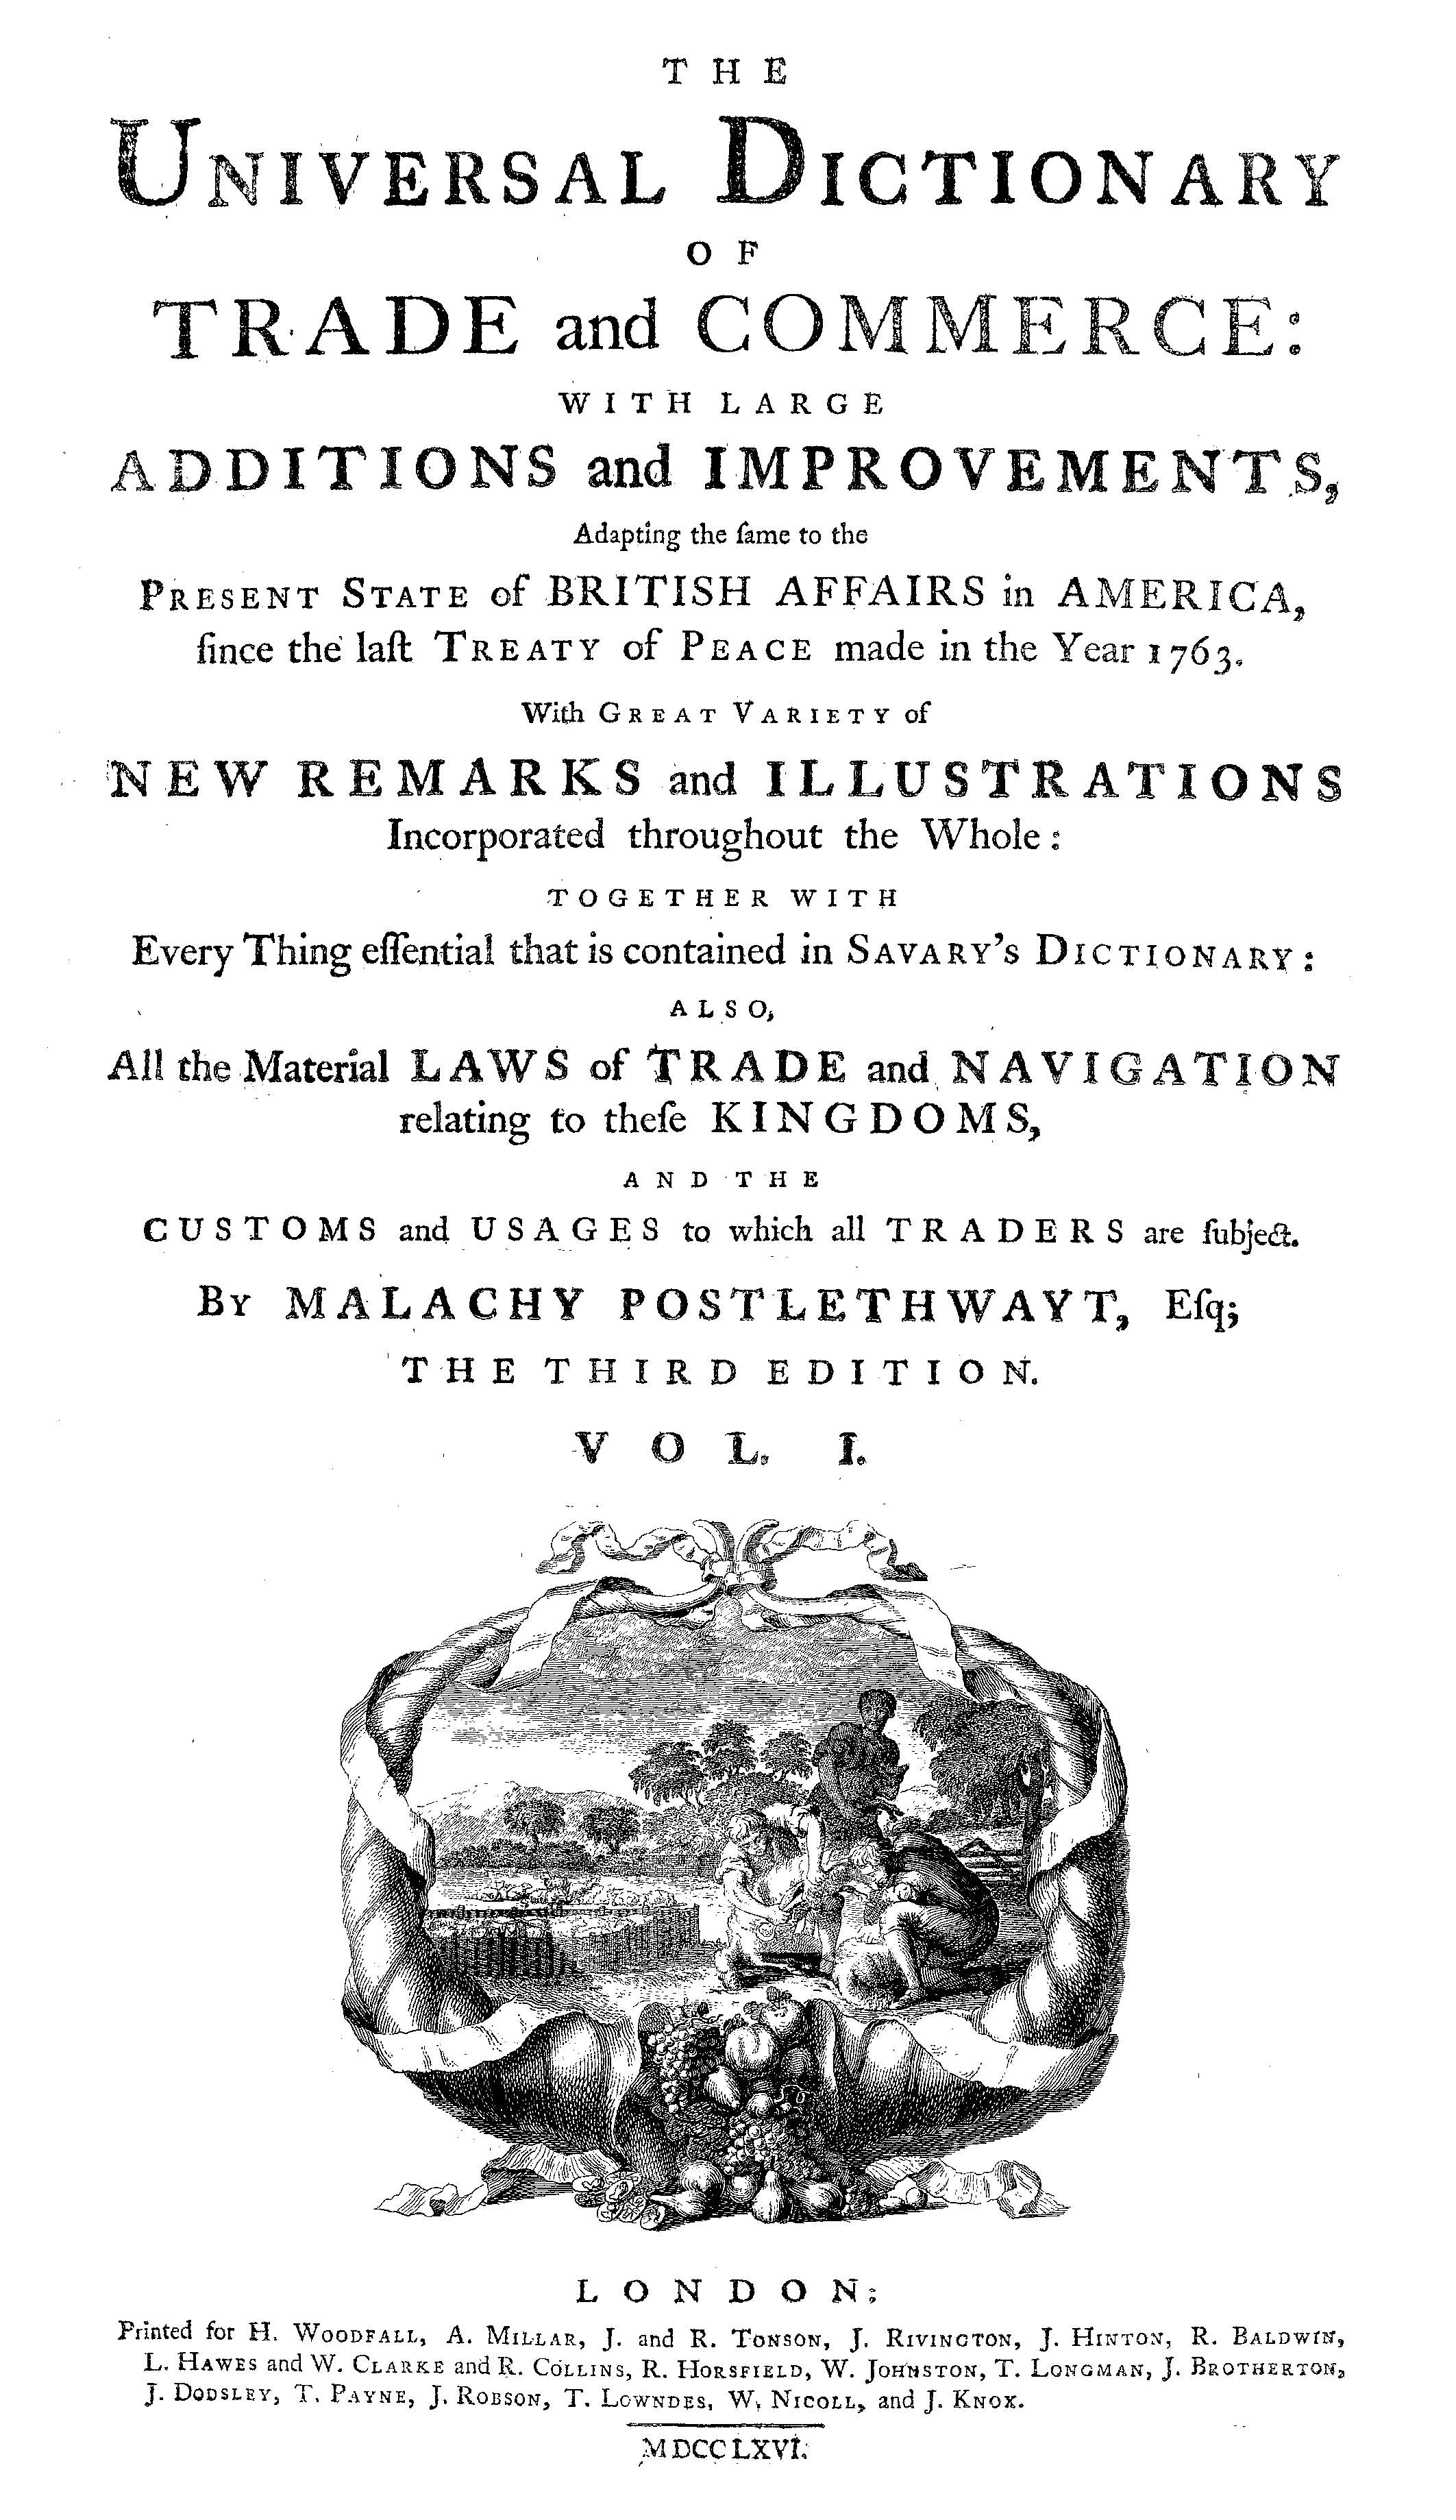 Malachy Postlethwayt. (Feb. 10, 1766). The Universal Dictionary of Trade and Commerce, Vol. 2, 942 pgs., Third Edition. H. Woodfall et al. 